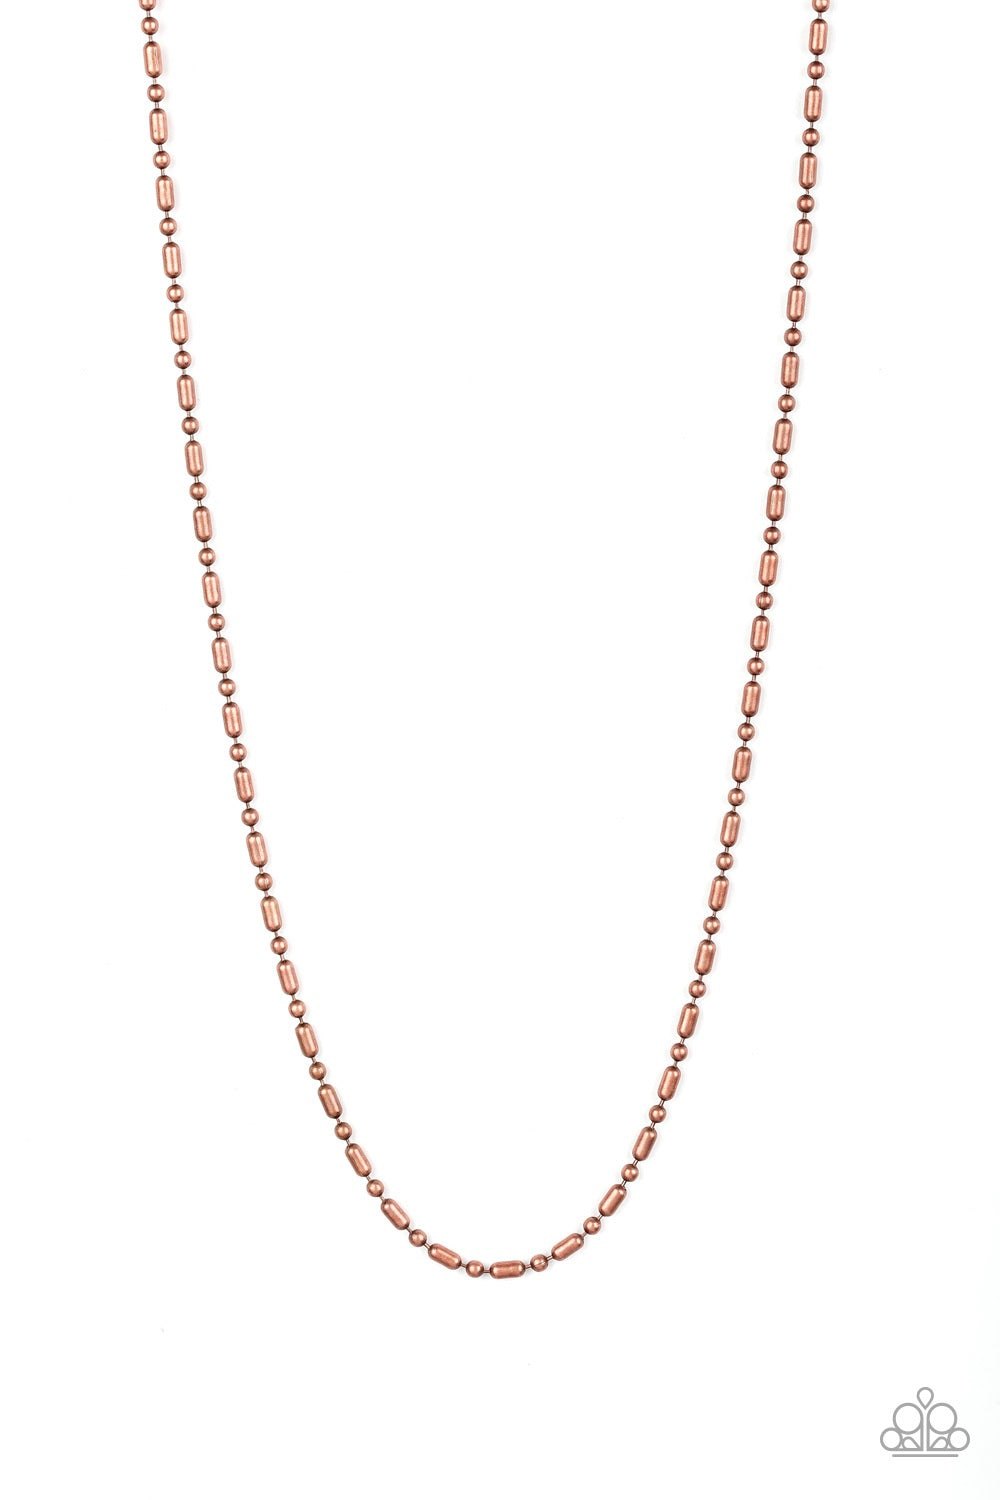 Covert Operation Copper-Necklace